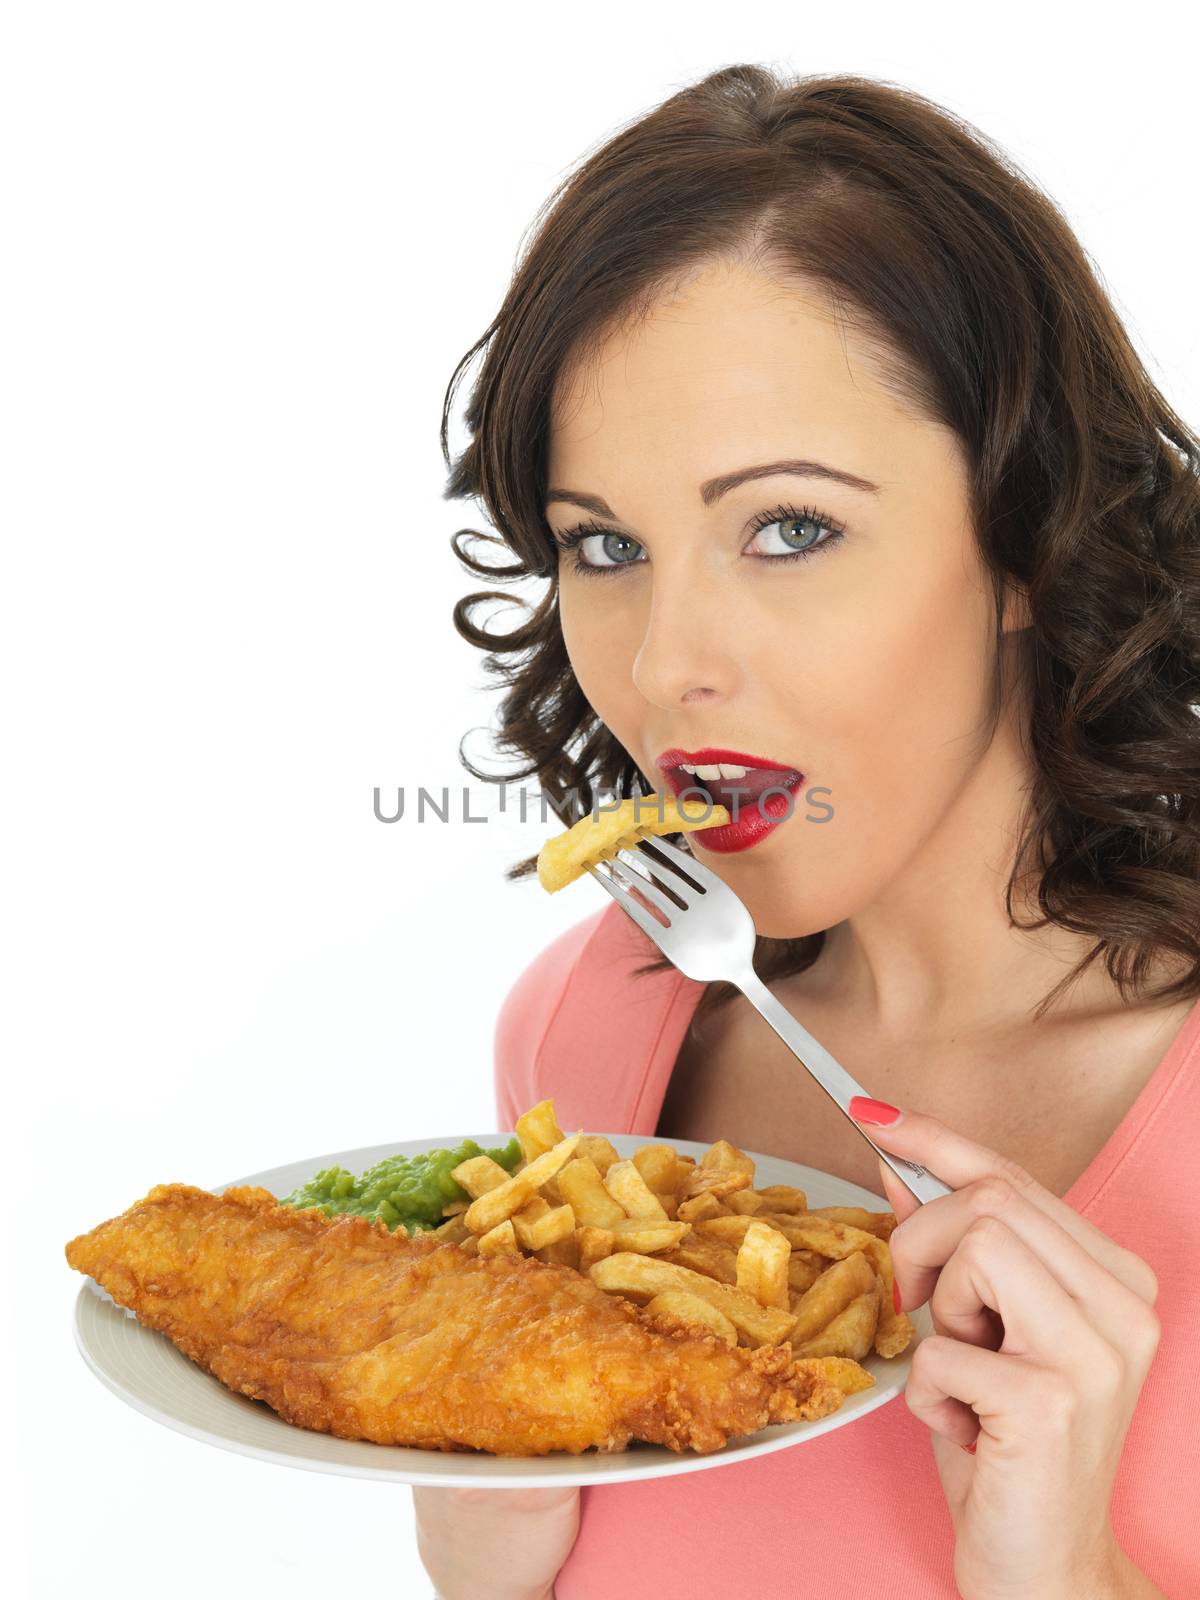 Young Woman Eating Fish and Chips with Mushy Peas by Whiteboxmedia